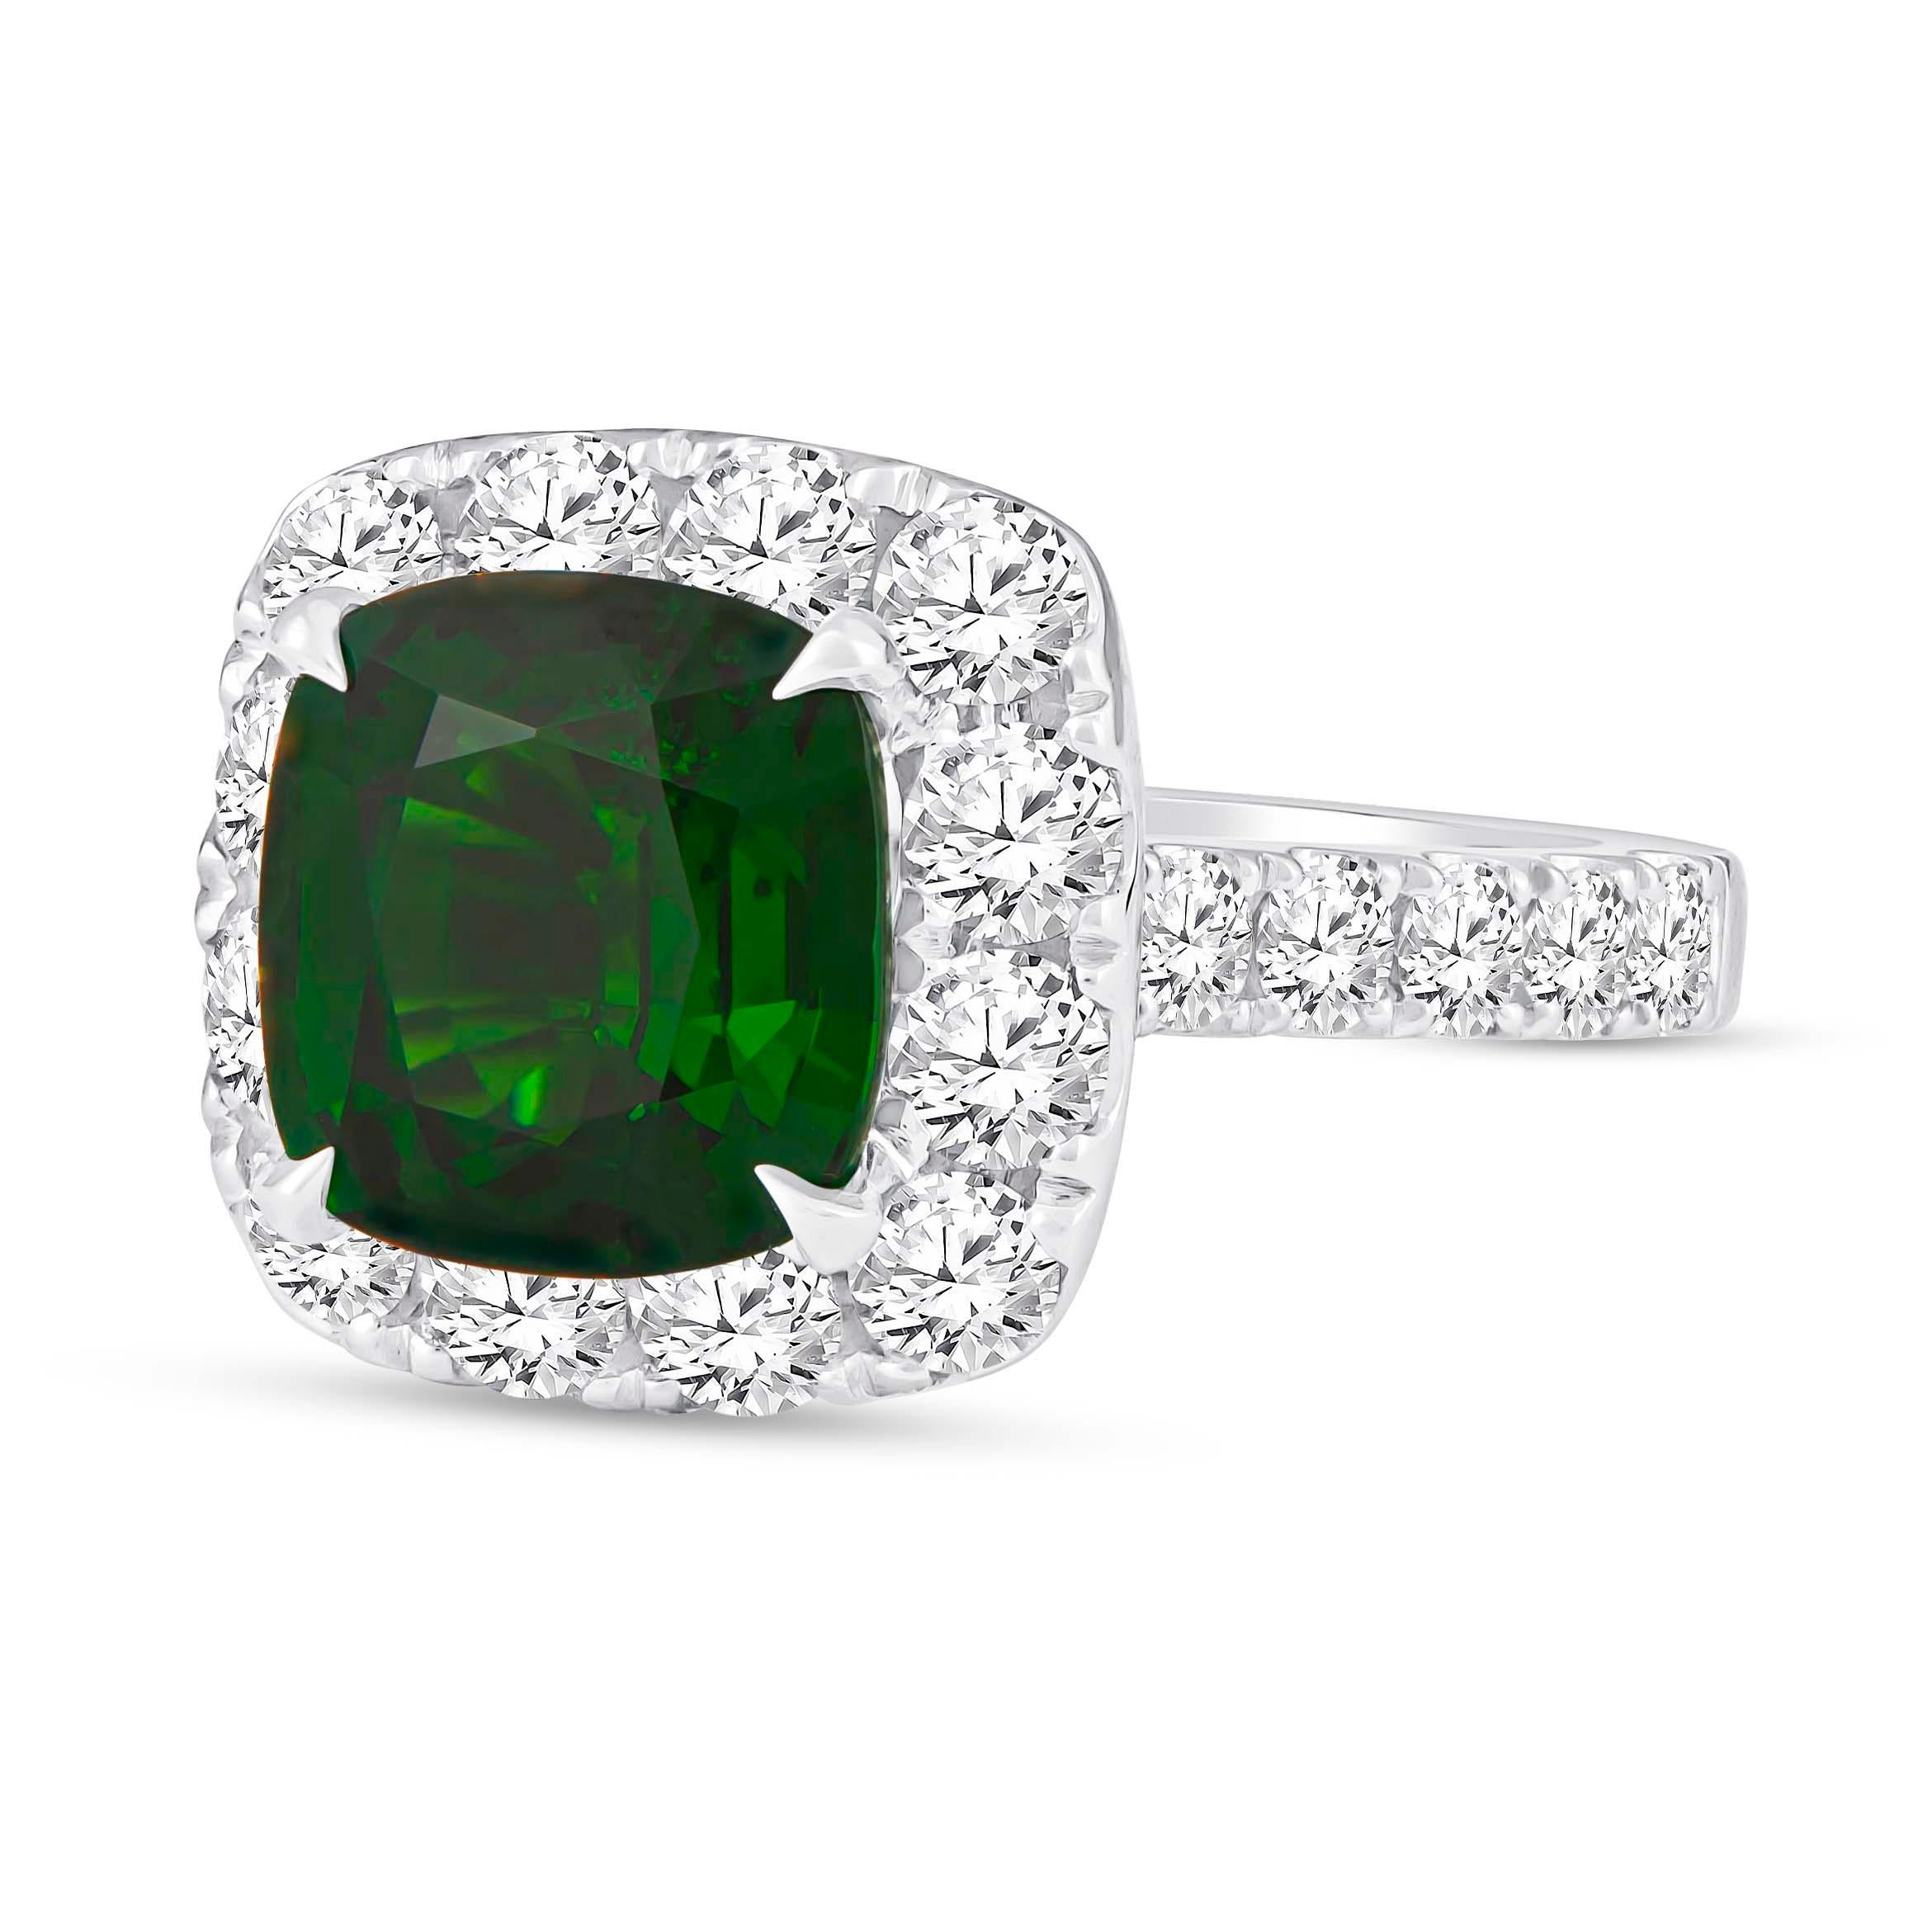 Stunning 18K white gold cathedral style halo ring that features one 4.04 carat mixed cut natural Grossular Tsavorite Garnet. The dark rich green garnet is beautifully surrounded by 1.60 carats of fine round brilliant cut diamonds in halo form. This